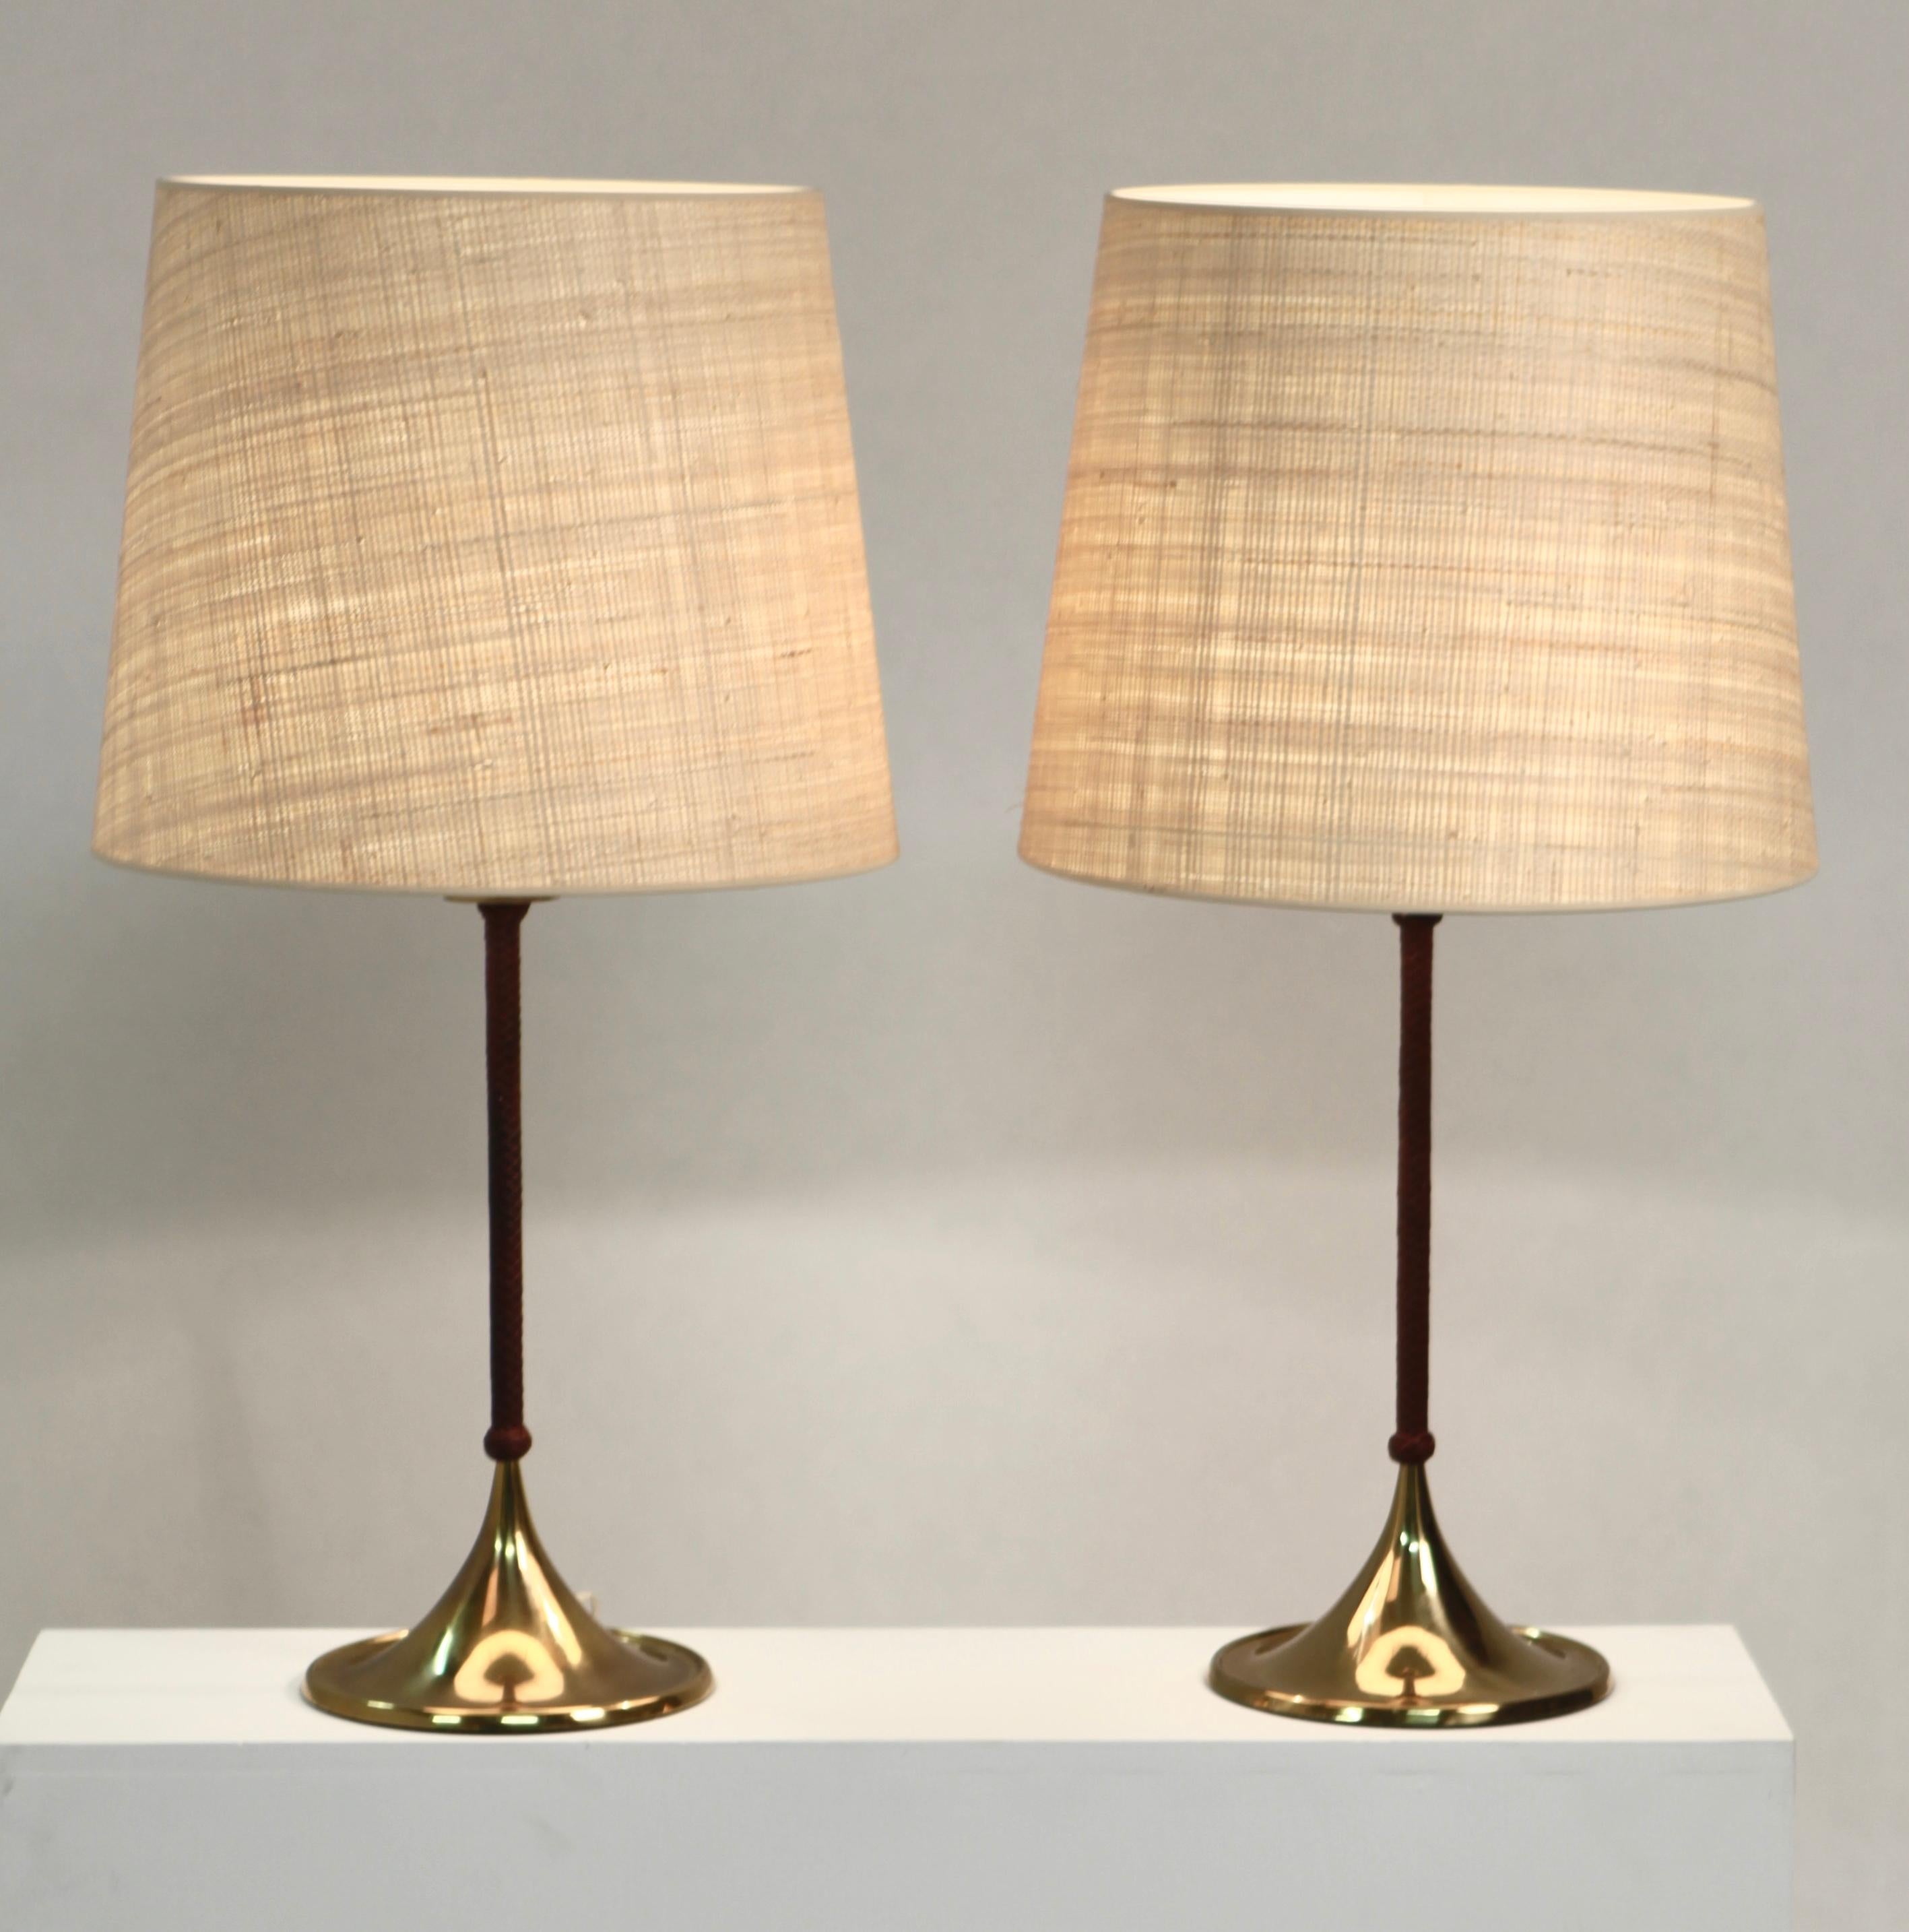 Pair of Rare Bergboms Table Lamps, B-024, Brass and Leather, Sweden, 1950s 4